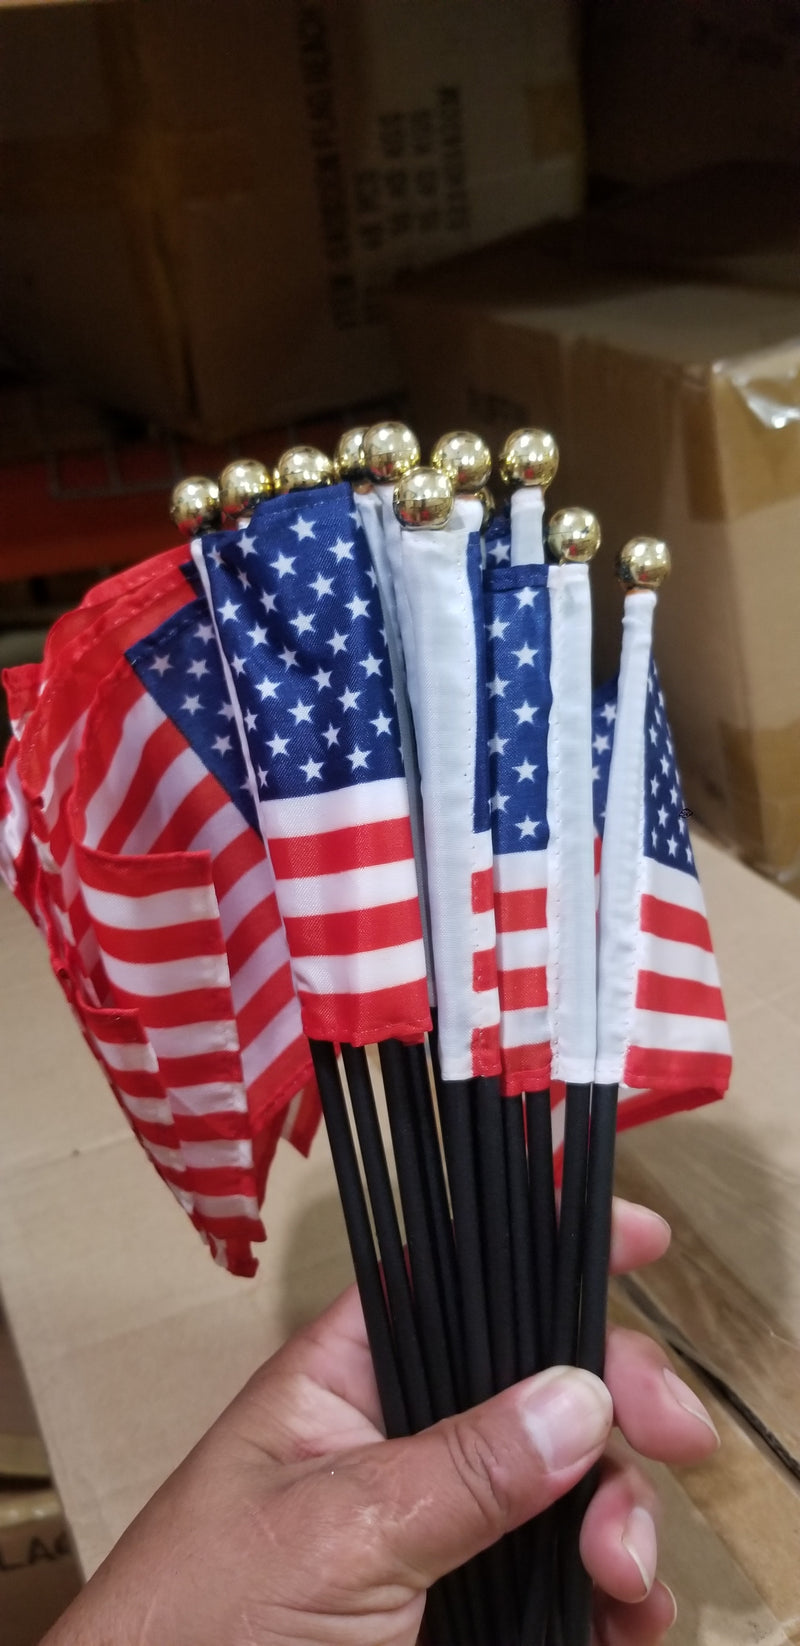 USA 4x6 inches Stick Flags Dura-Lite ™ Safety Gold Ball Premium American Flags